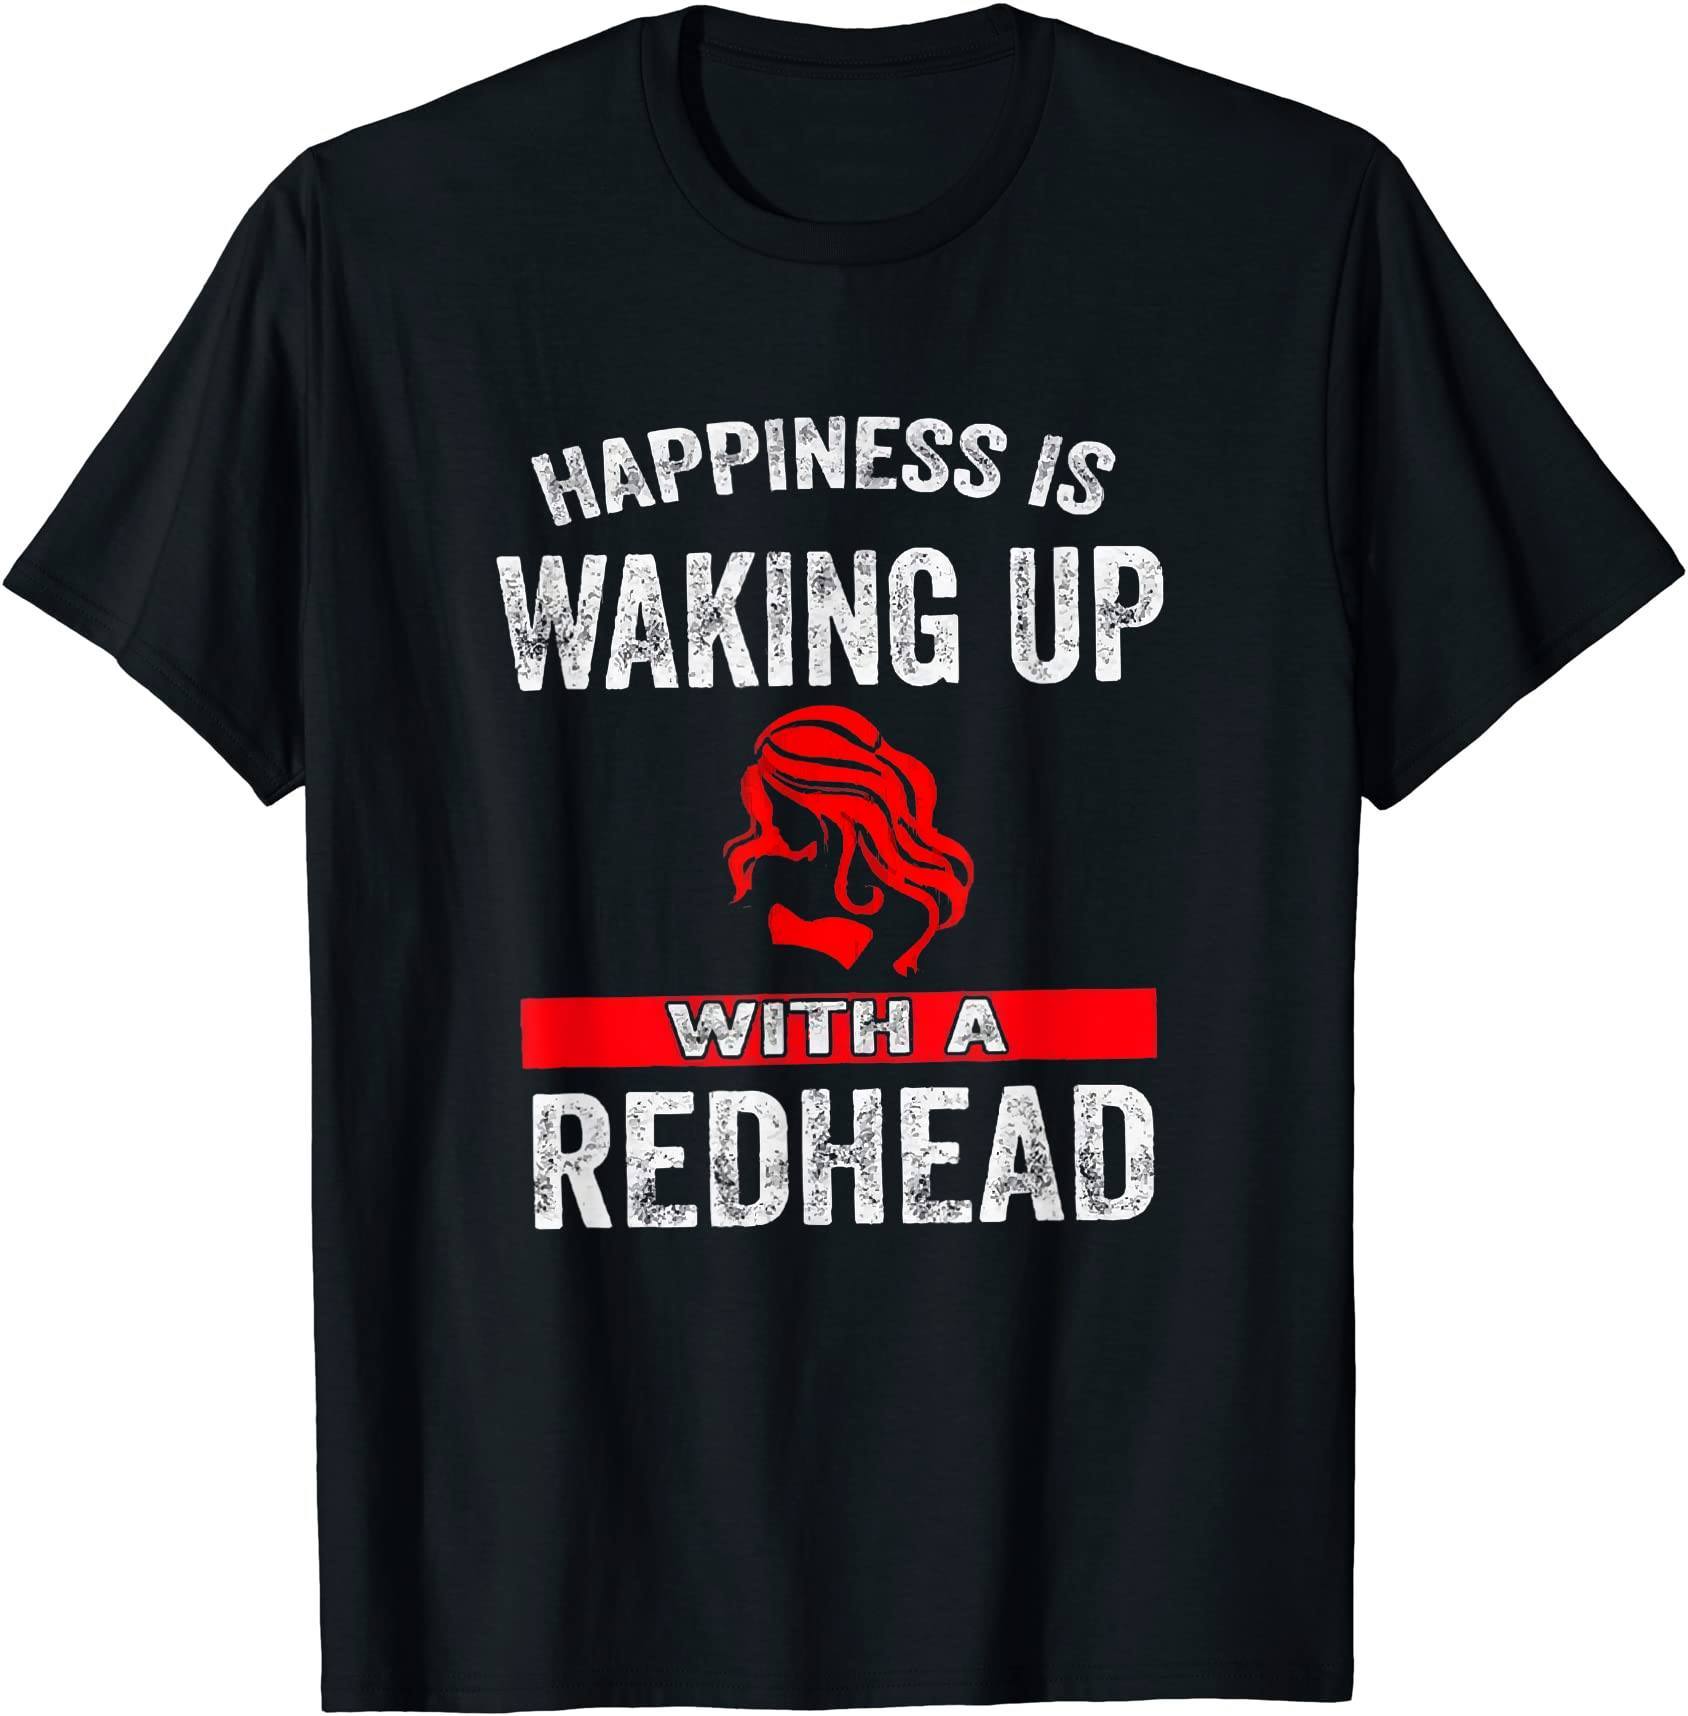 Happiness is waking up with a redhead